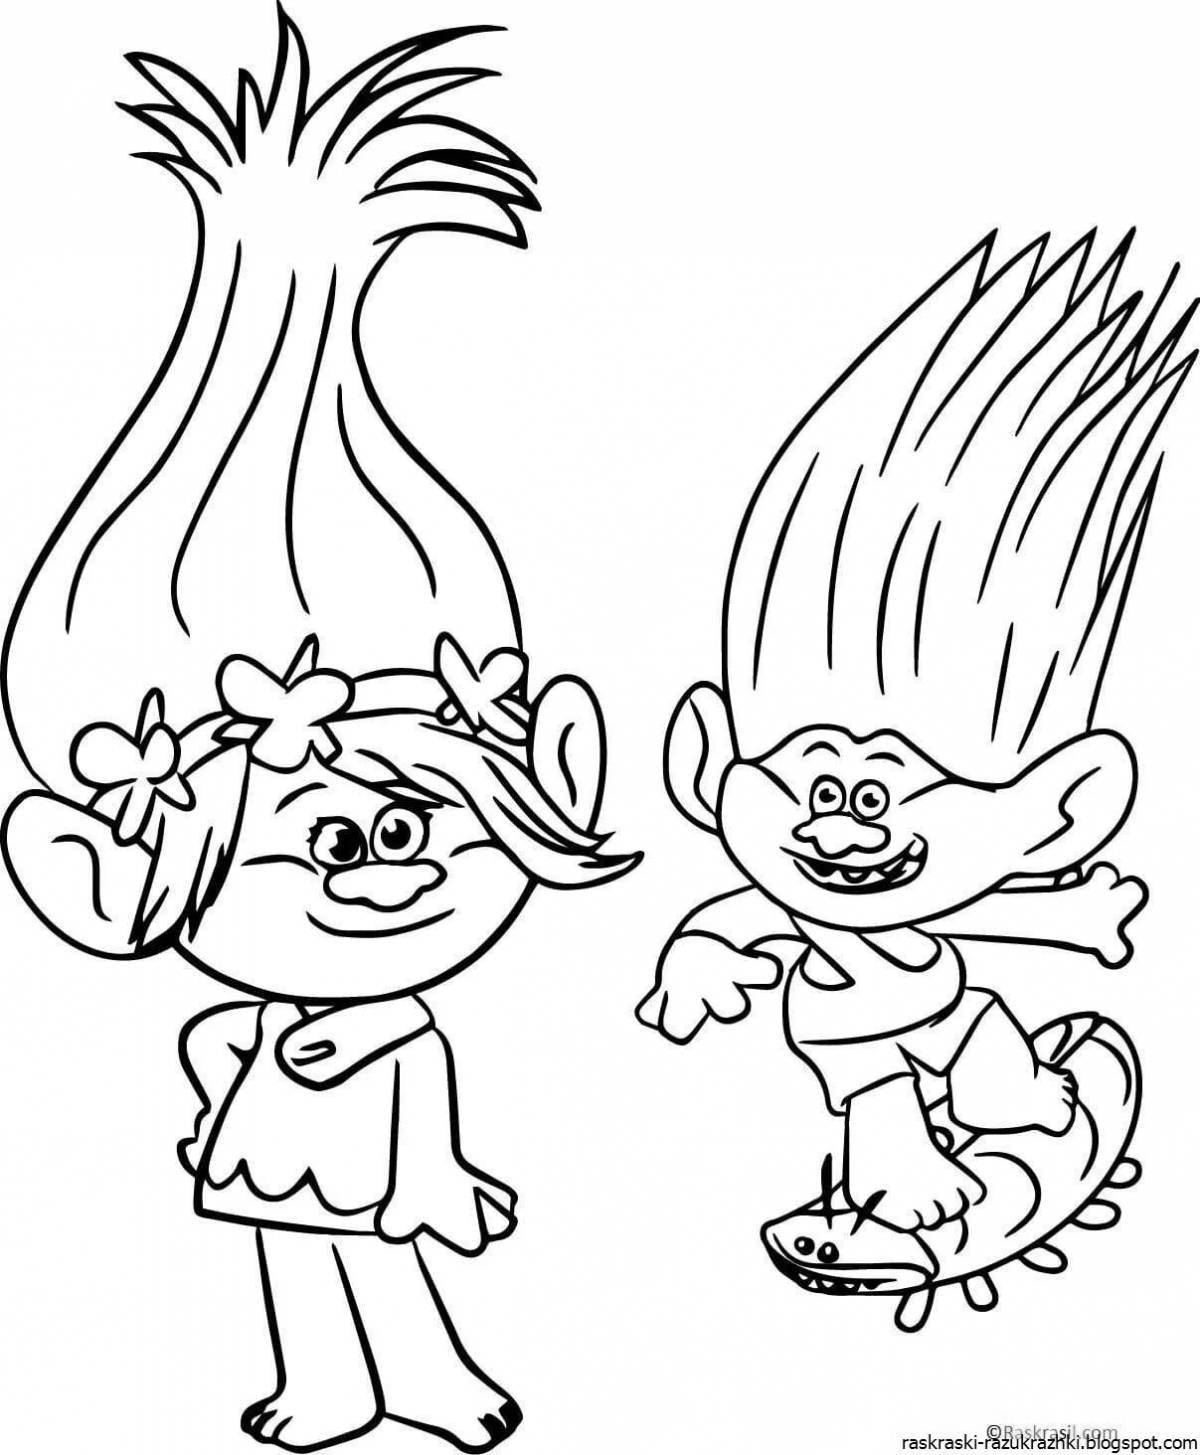 Amazing coloring pages trolls for kids